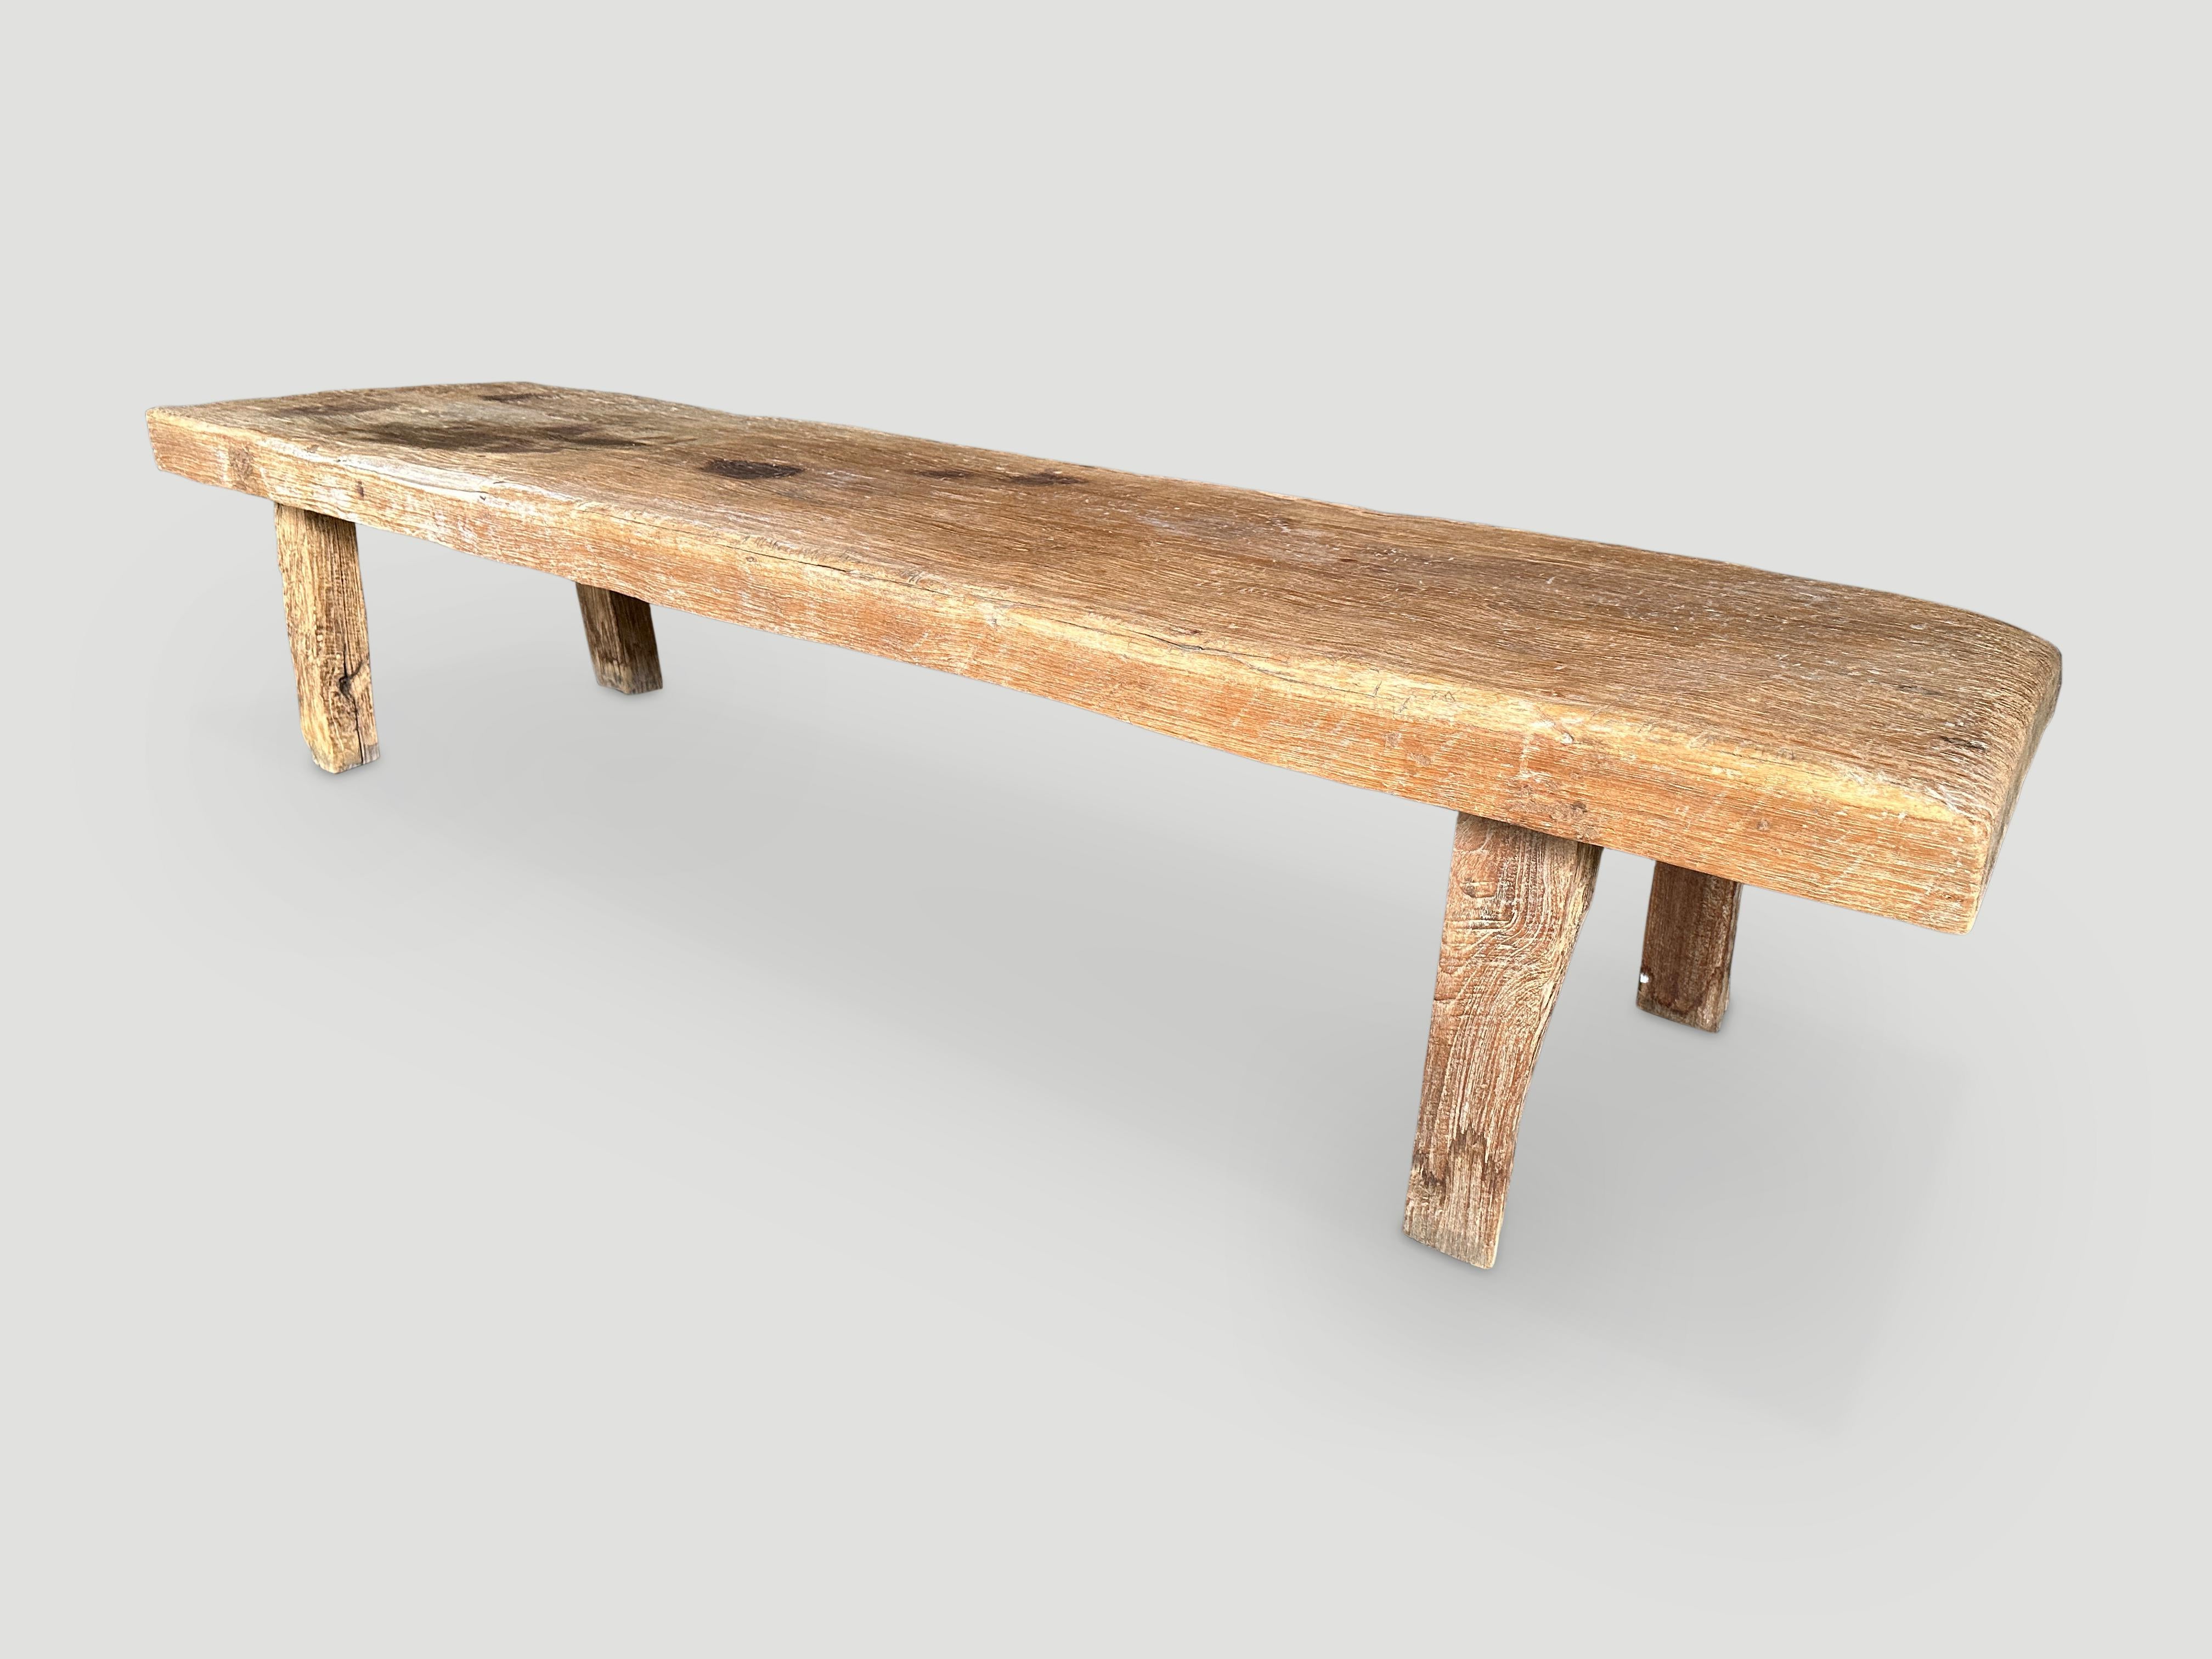 Rustic Impressive Antique Teak Wood Coffee Table or Bench